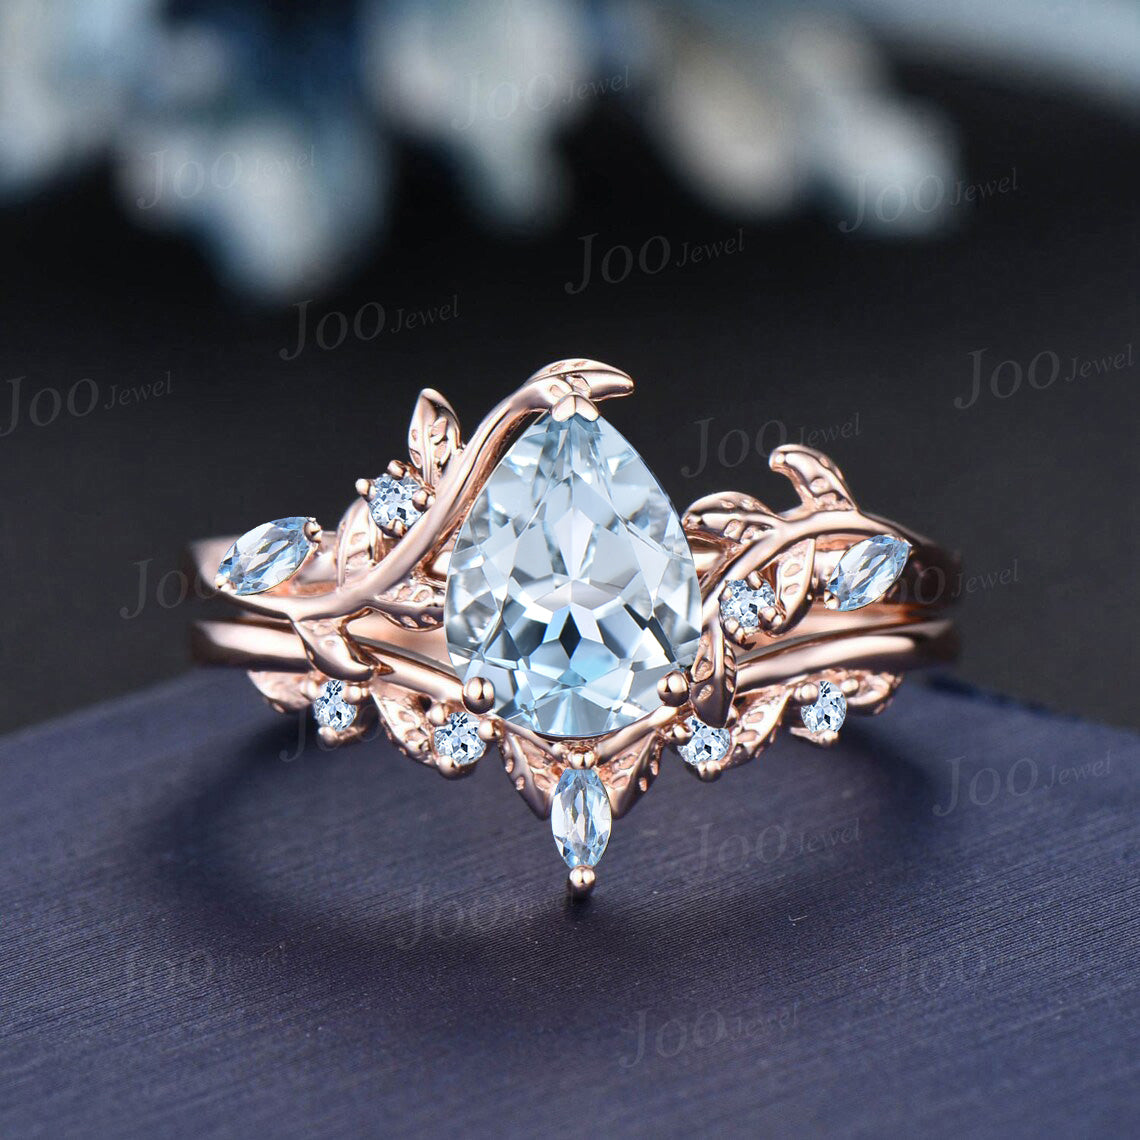 Pear Shaped Natural Aquamarine Engagement Ring Set Rose Gold Leaf Branch Nature Inspired Aquamarine Wedding Ring Set for Women Jewelry Gifts